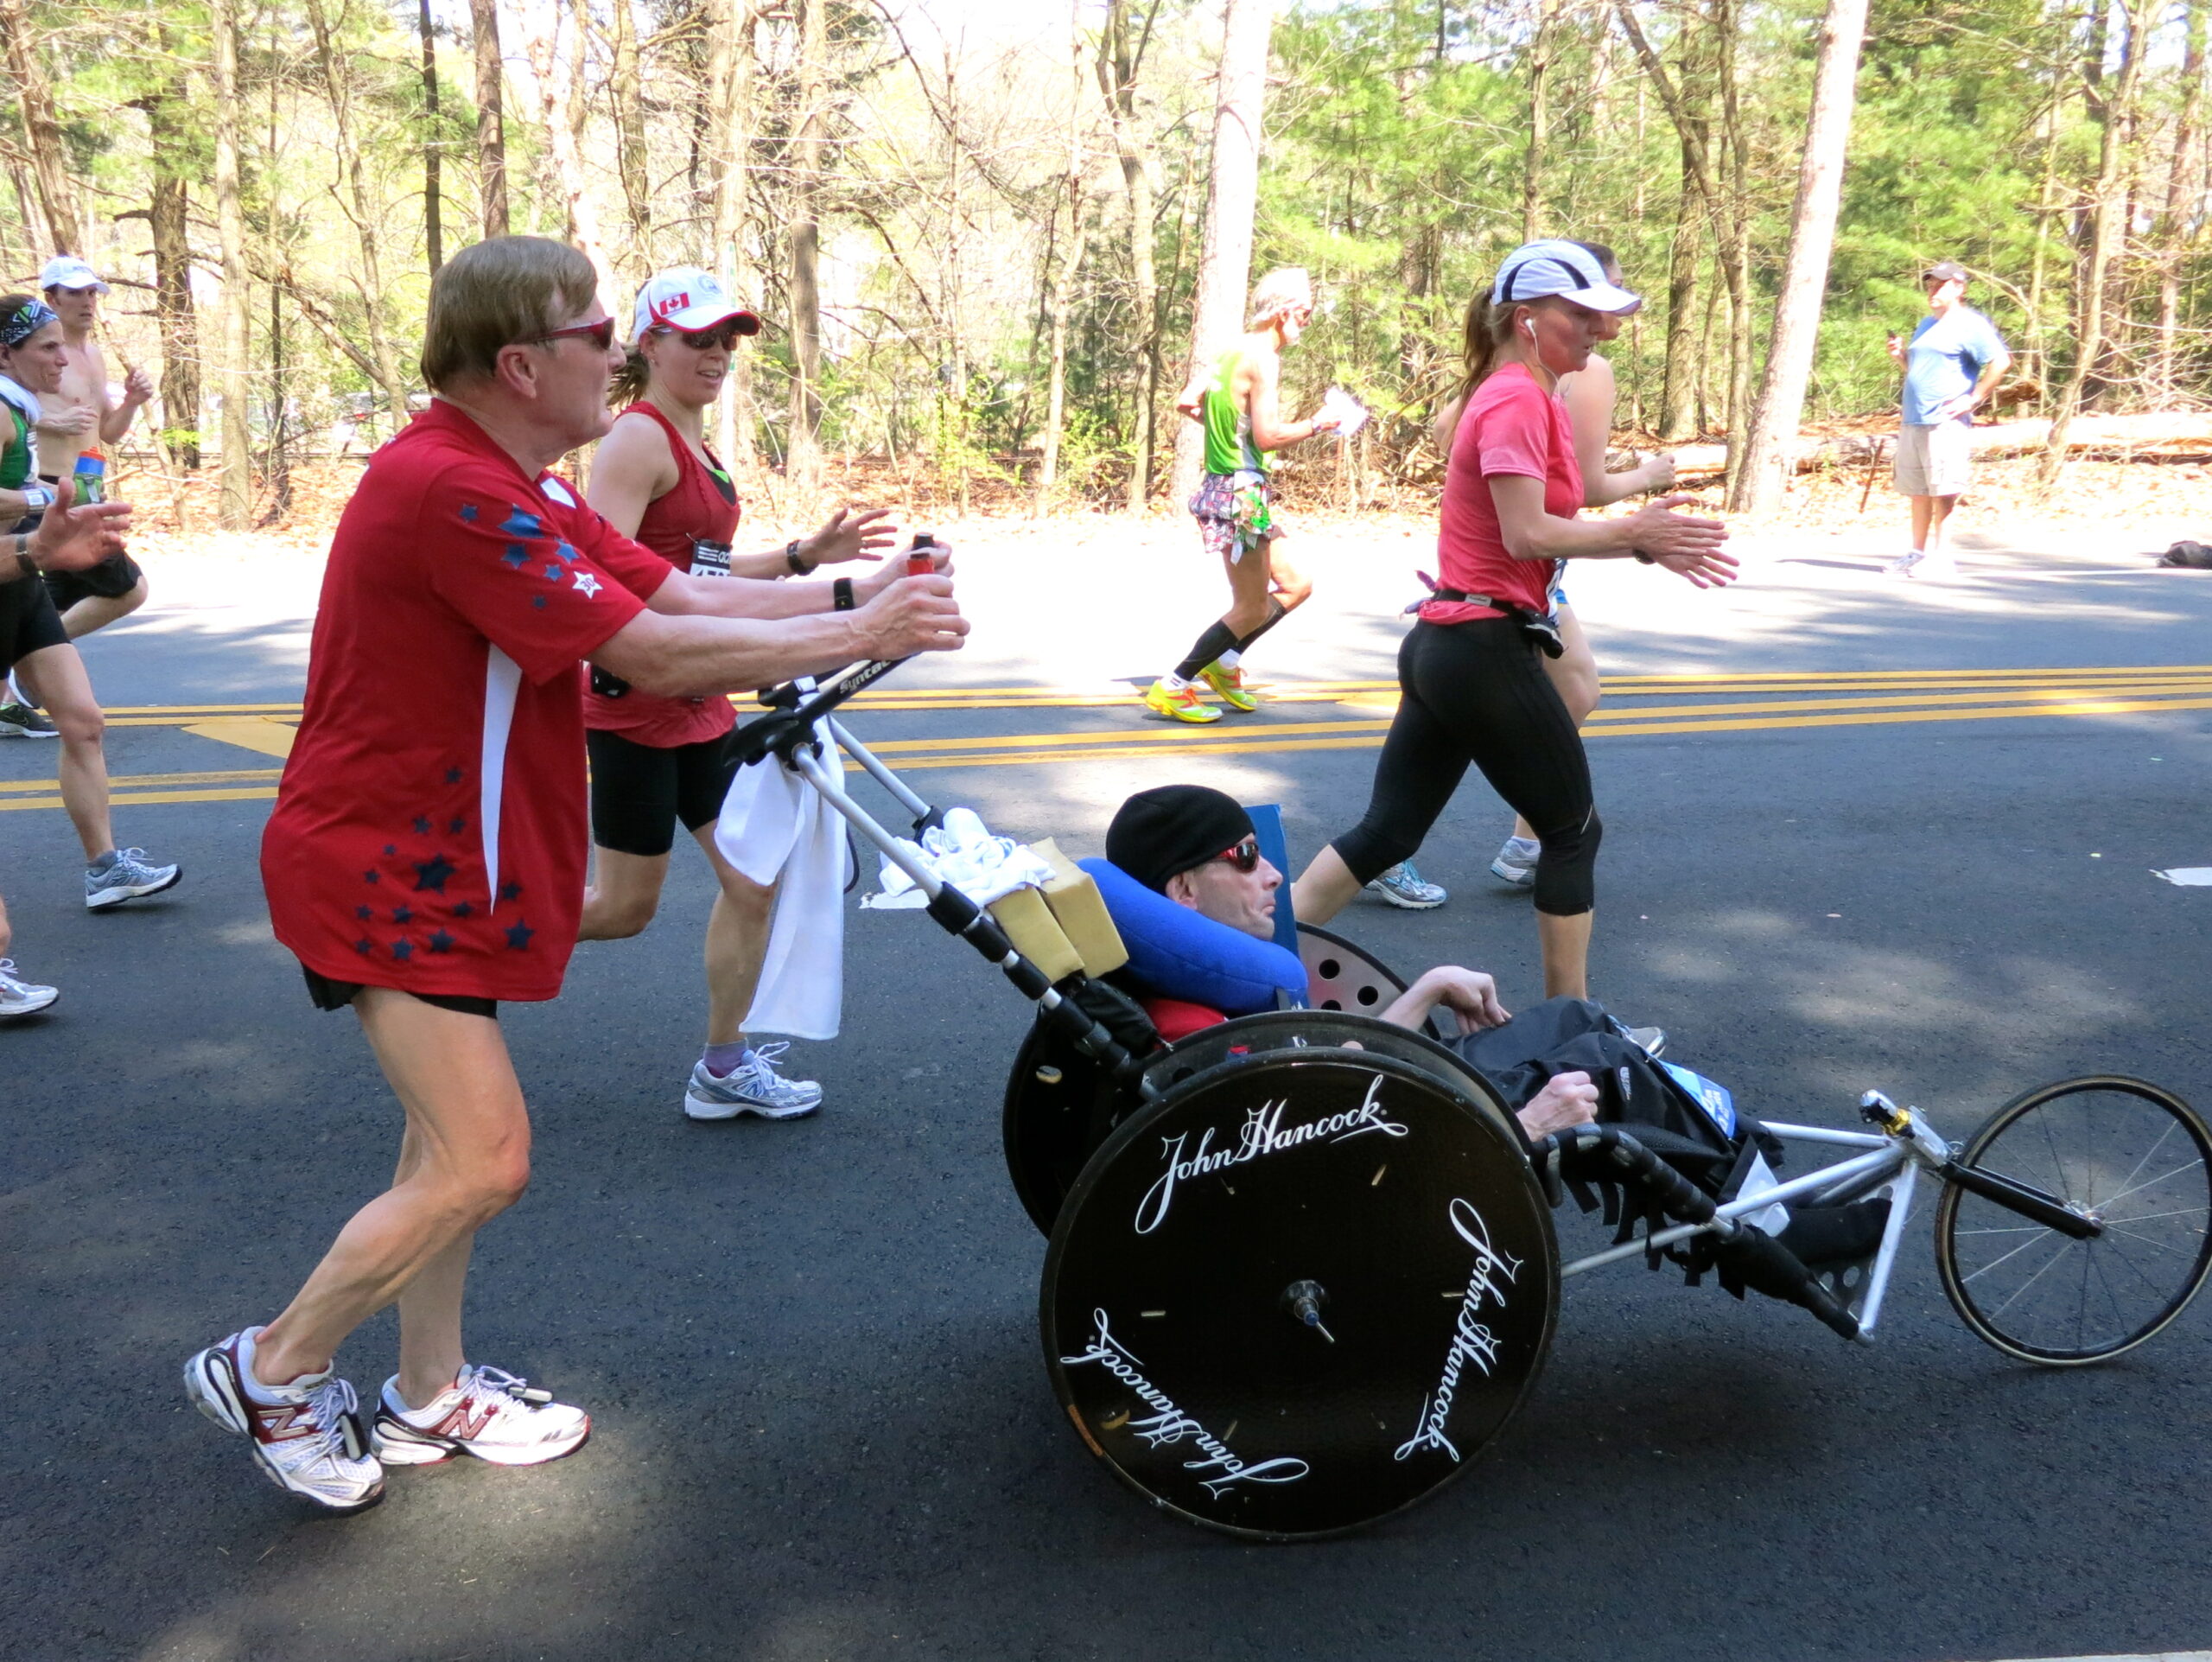 “When I’m Running, it Feels like I am not Disabled:” Lessons on Being a Great Teammate from the Best Team You've Never Heard Of